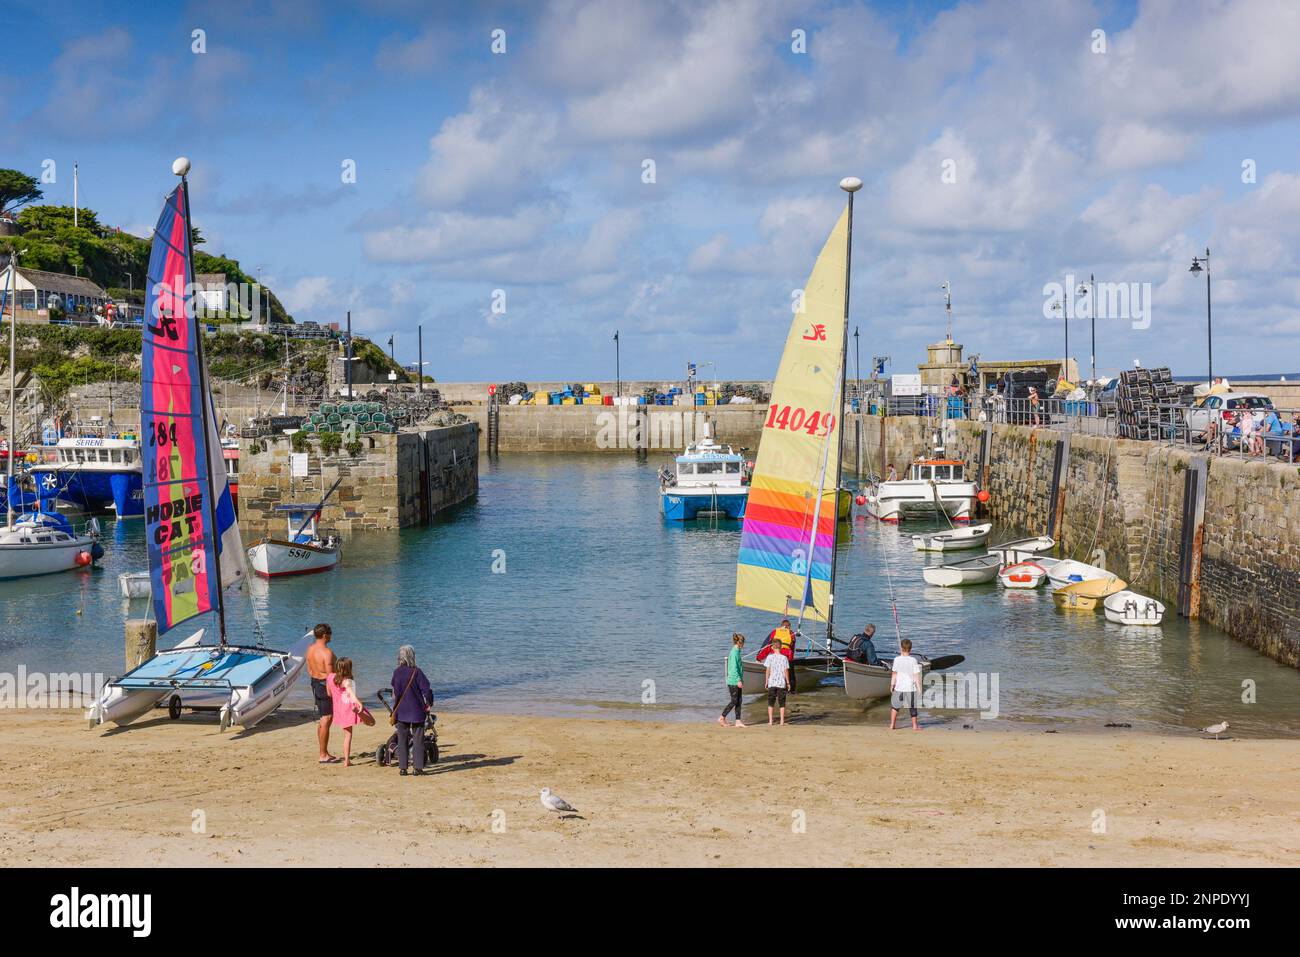 The historic picturesque Newquay Harbour in Newquay on the North Cornwall coast. Stock Photo